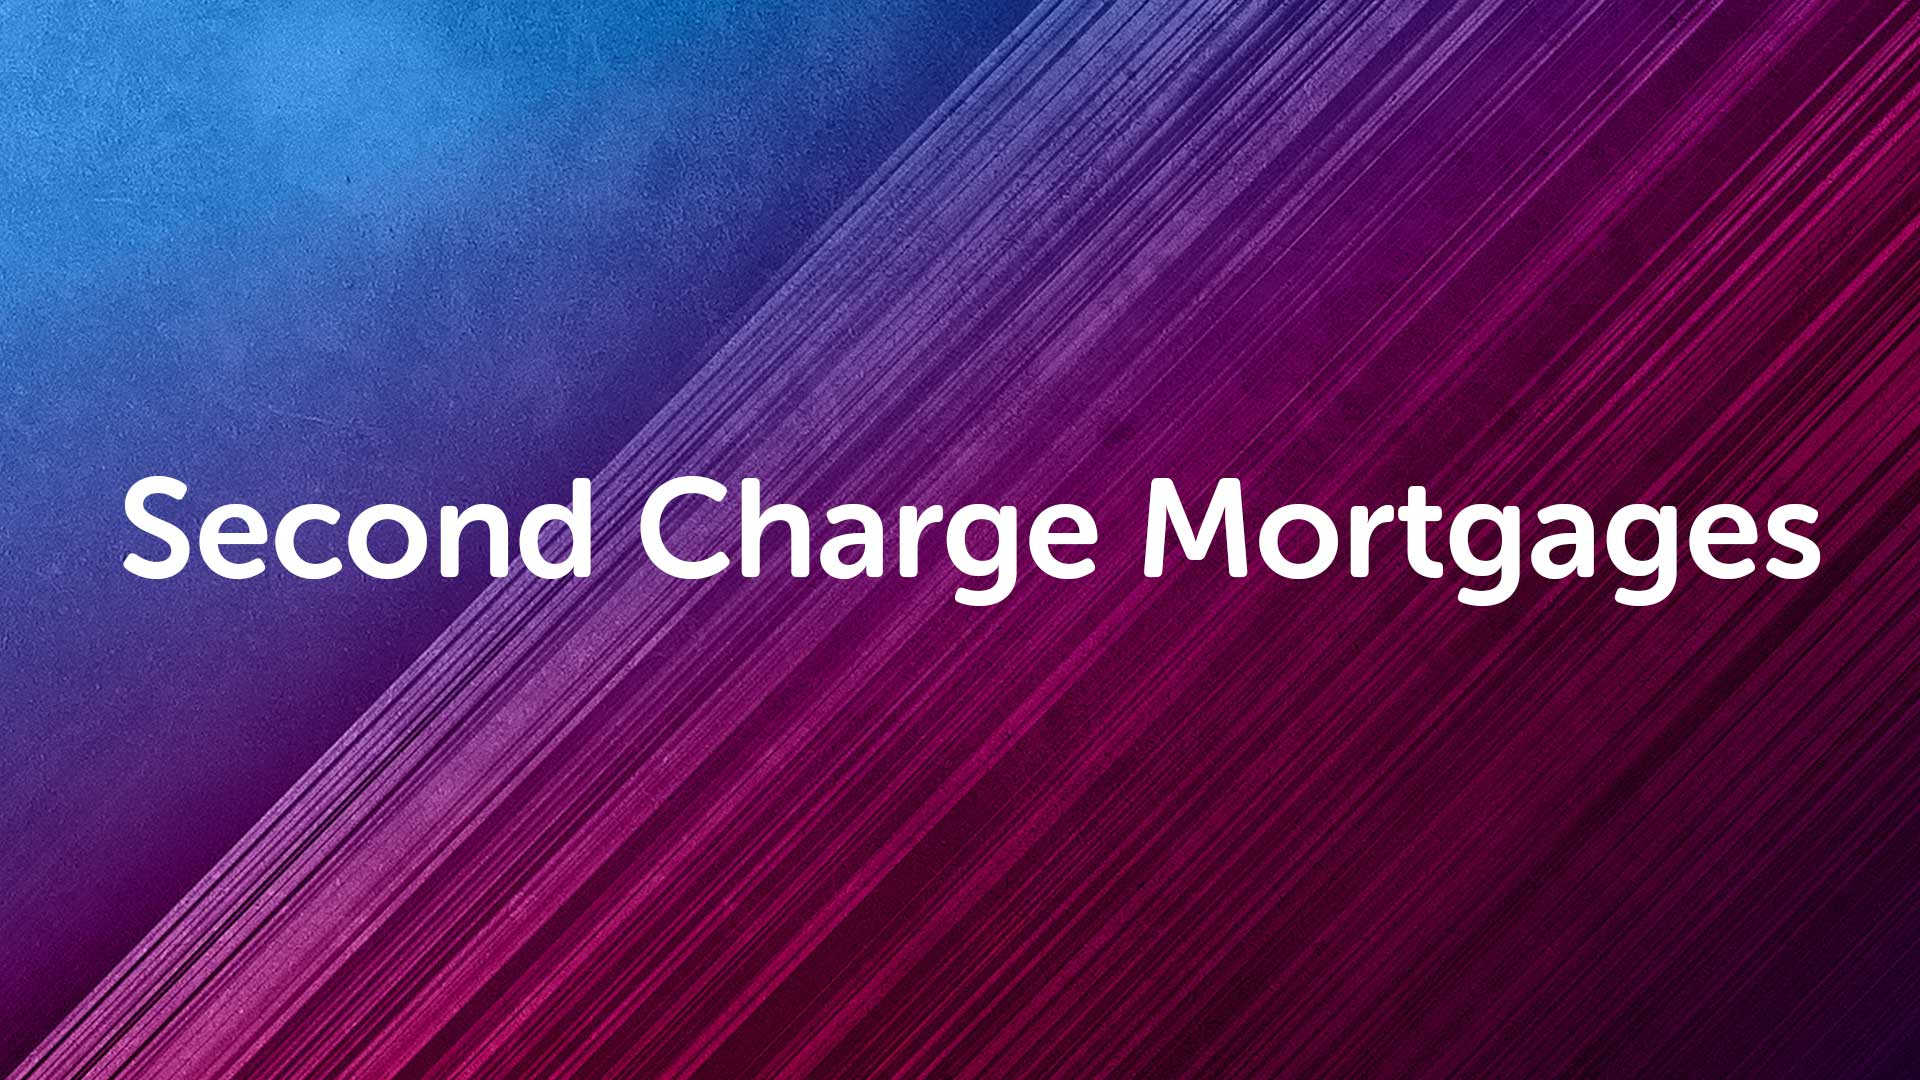 Second Charge Mortgage in Doncaster | Doncastermoneyman